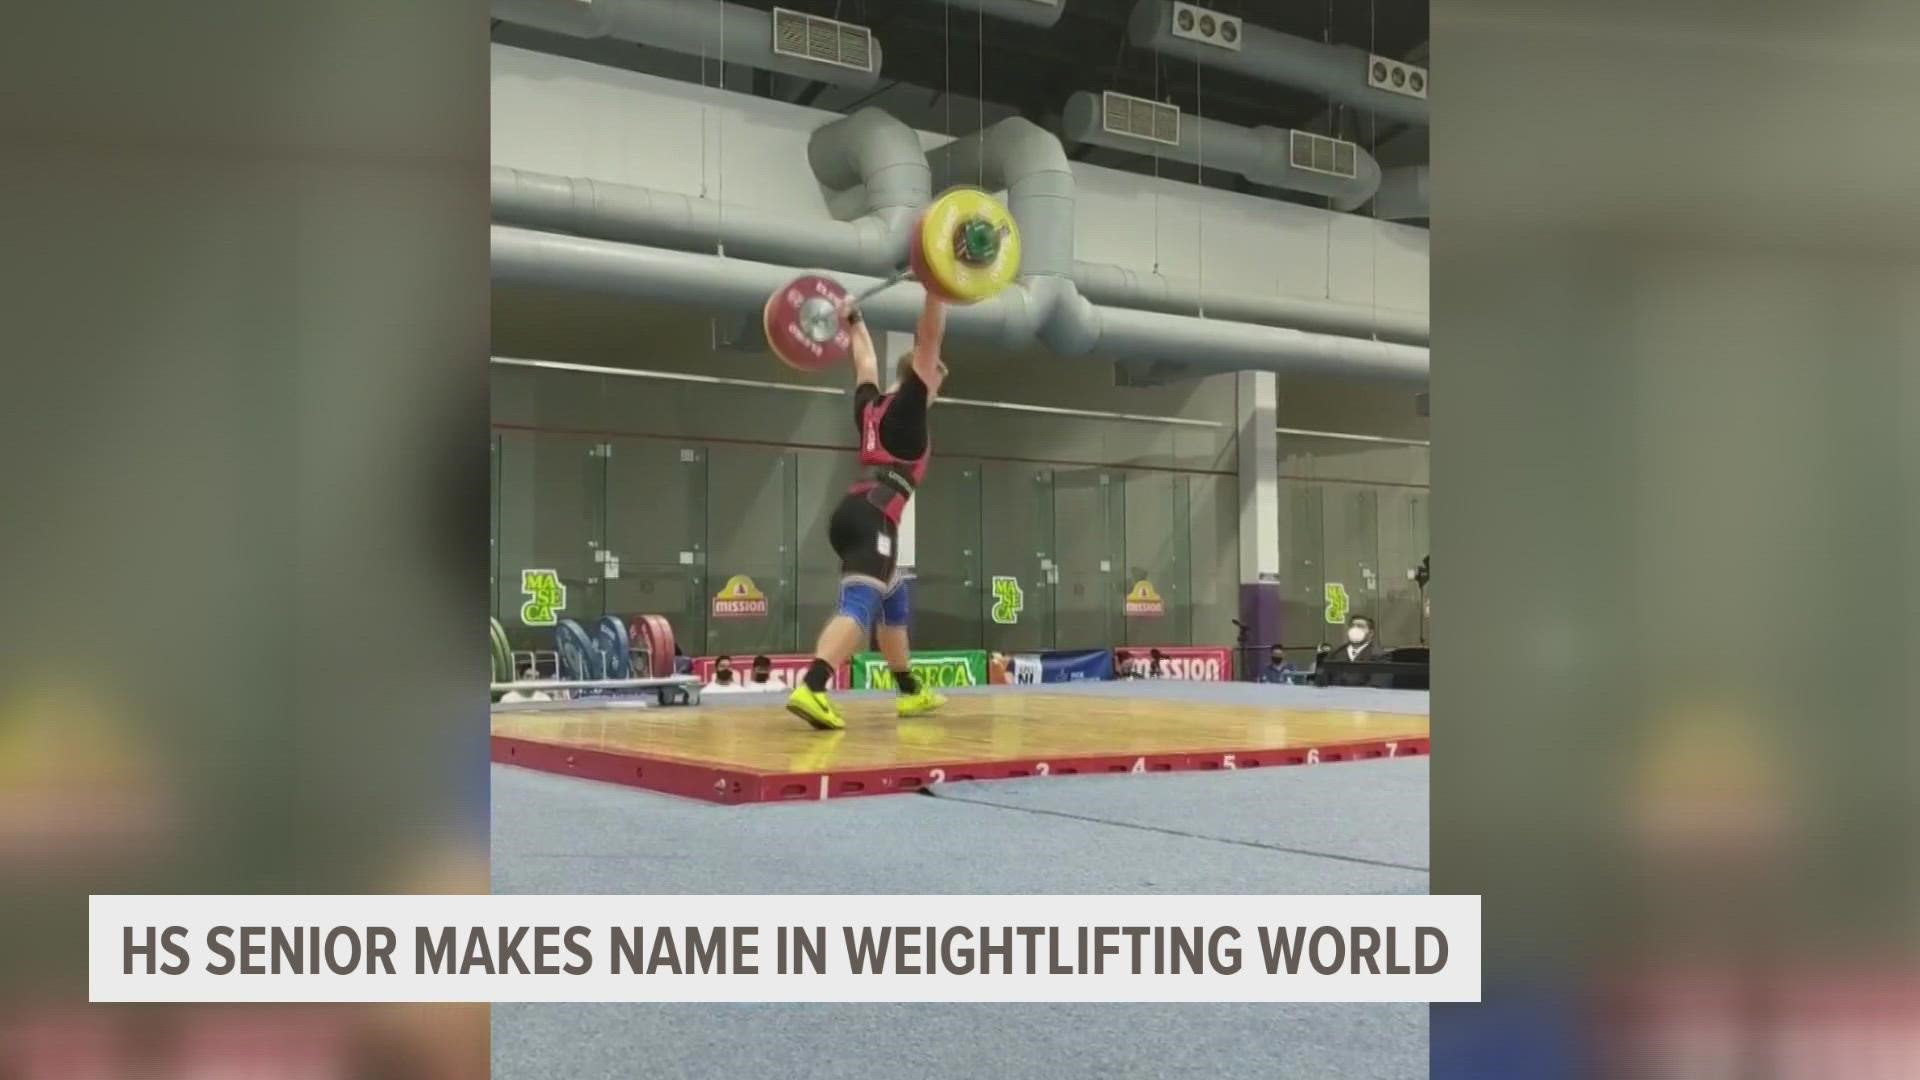 Colin Reis of Denison placed sixth overall at the Youth World Weightlifting Championships in Saudi Arabia.